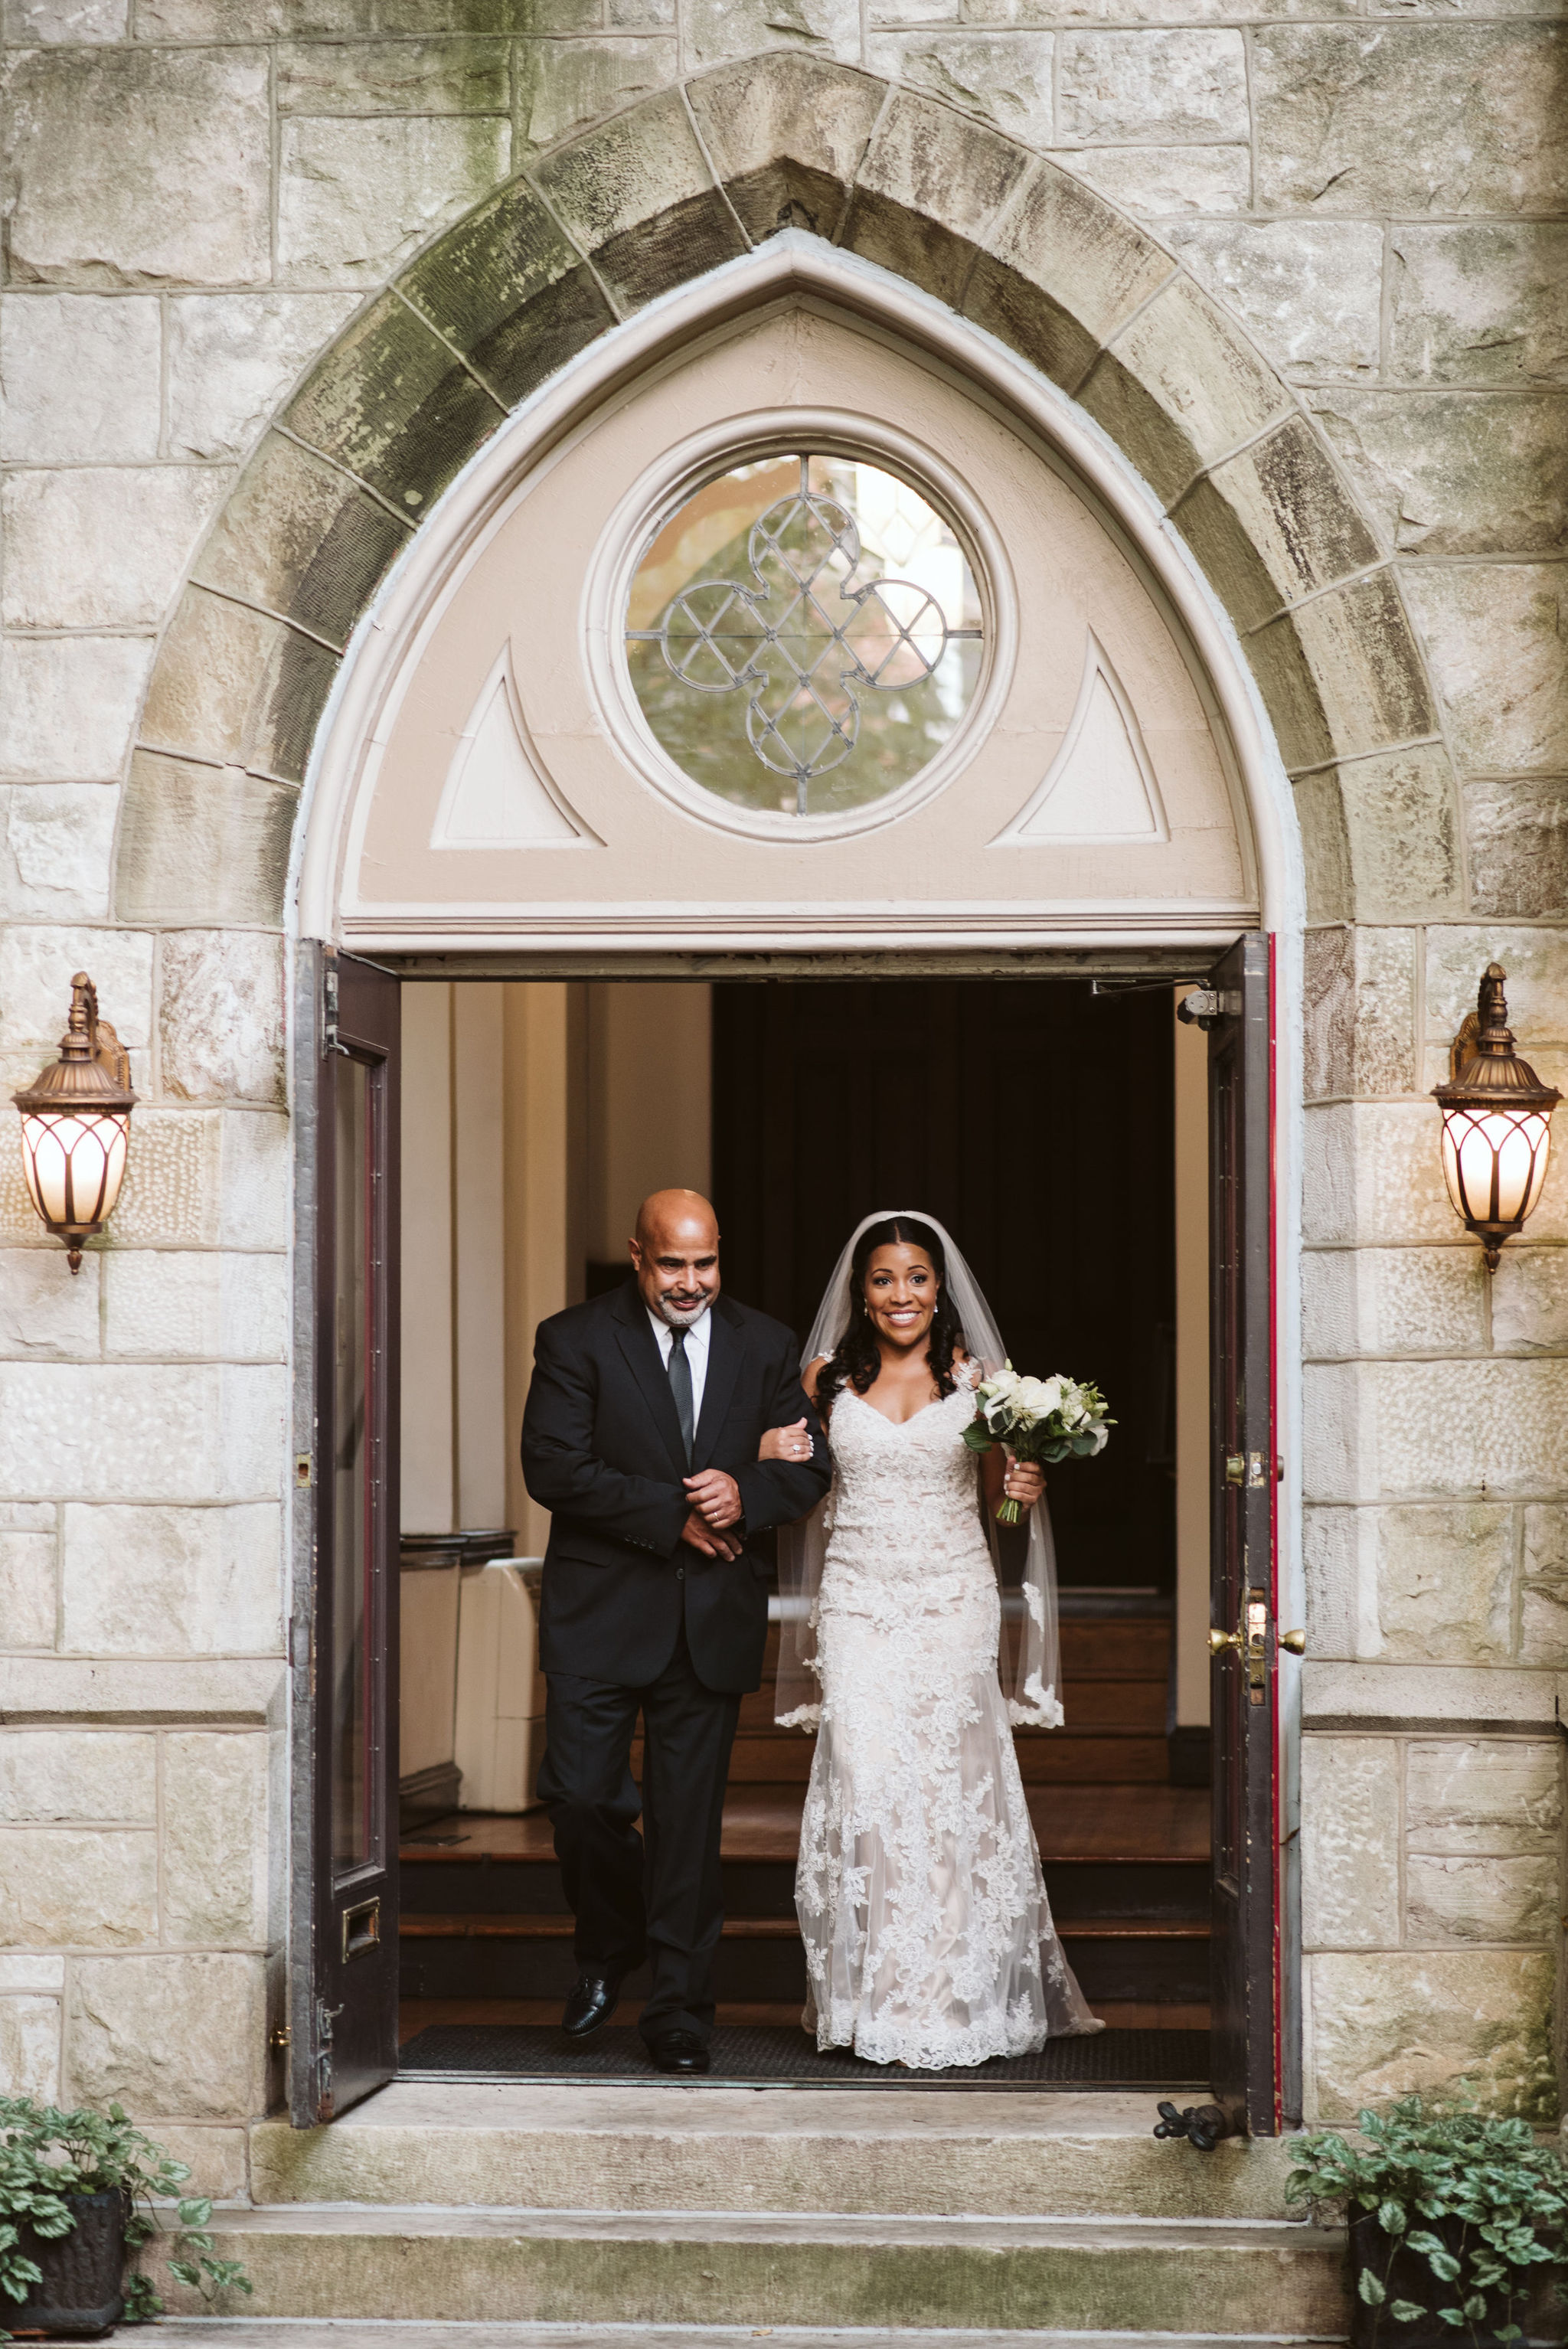  Baltimore, Maryland Wedding Photographer, Mount Vernon, Chase Court, Classic, Outdoor Ceremony, Garden, Romantic, Smiling Bride Walking through Doorway with Father of the Bride, Lace Wedding Dress 